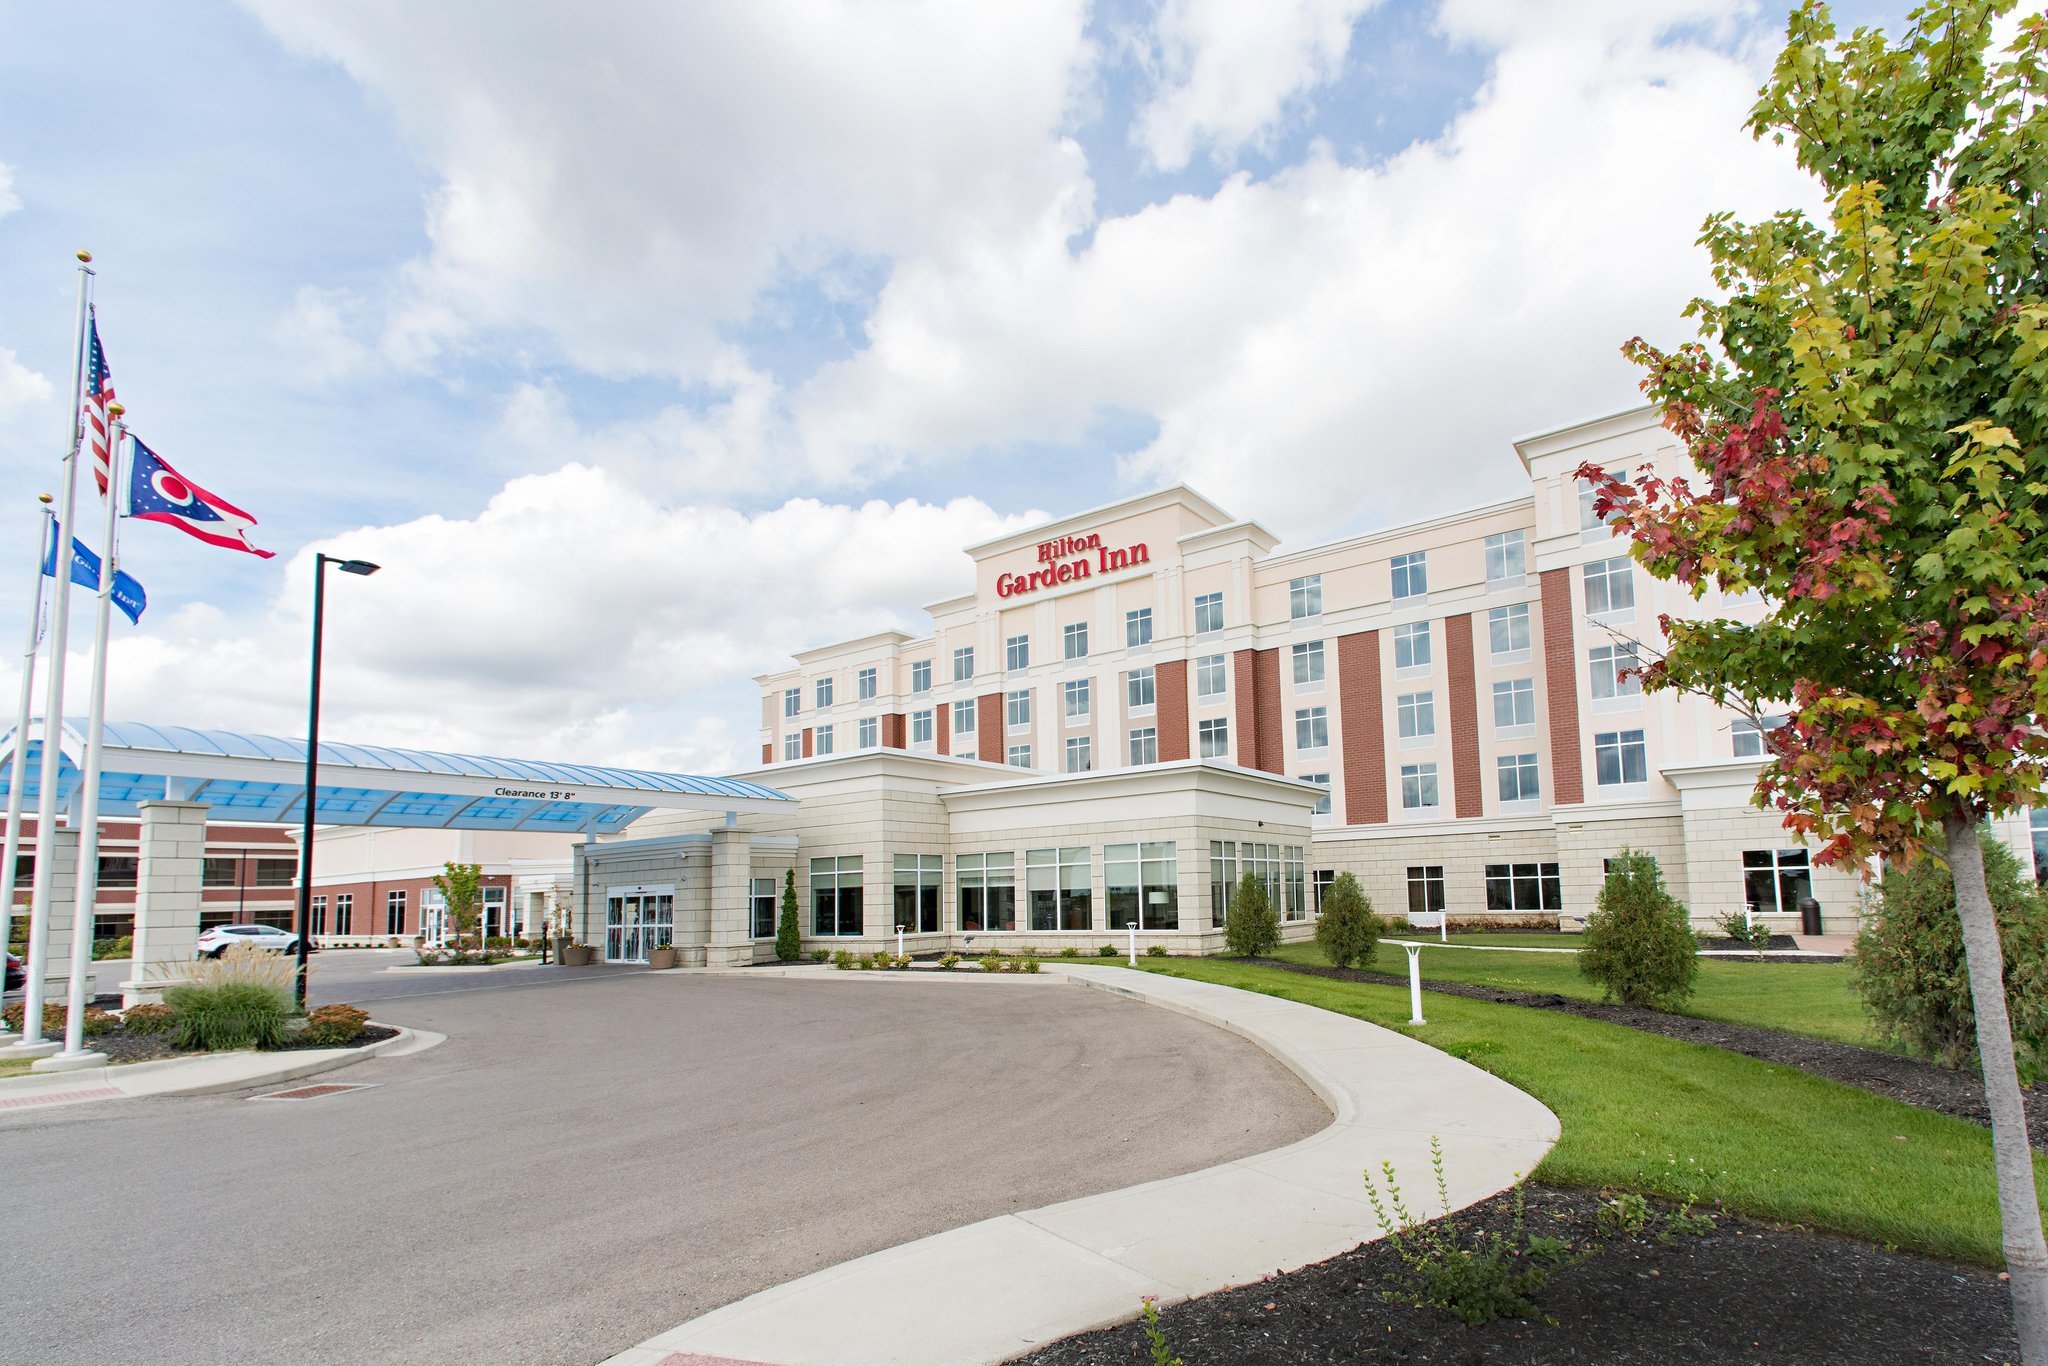 Photo of S&S Managed Hotels, Sidney, OH